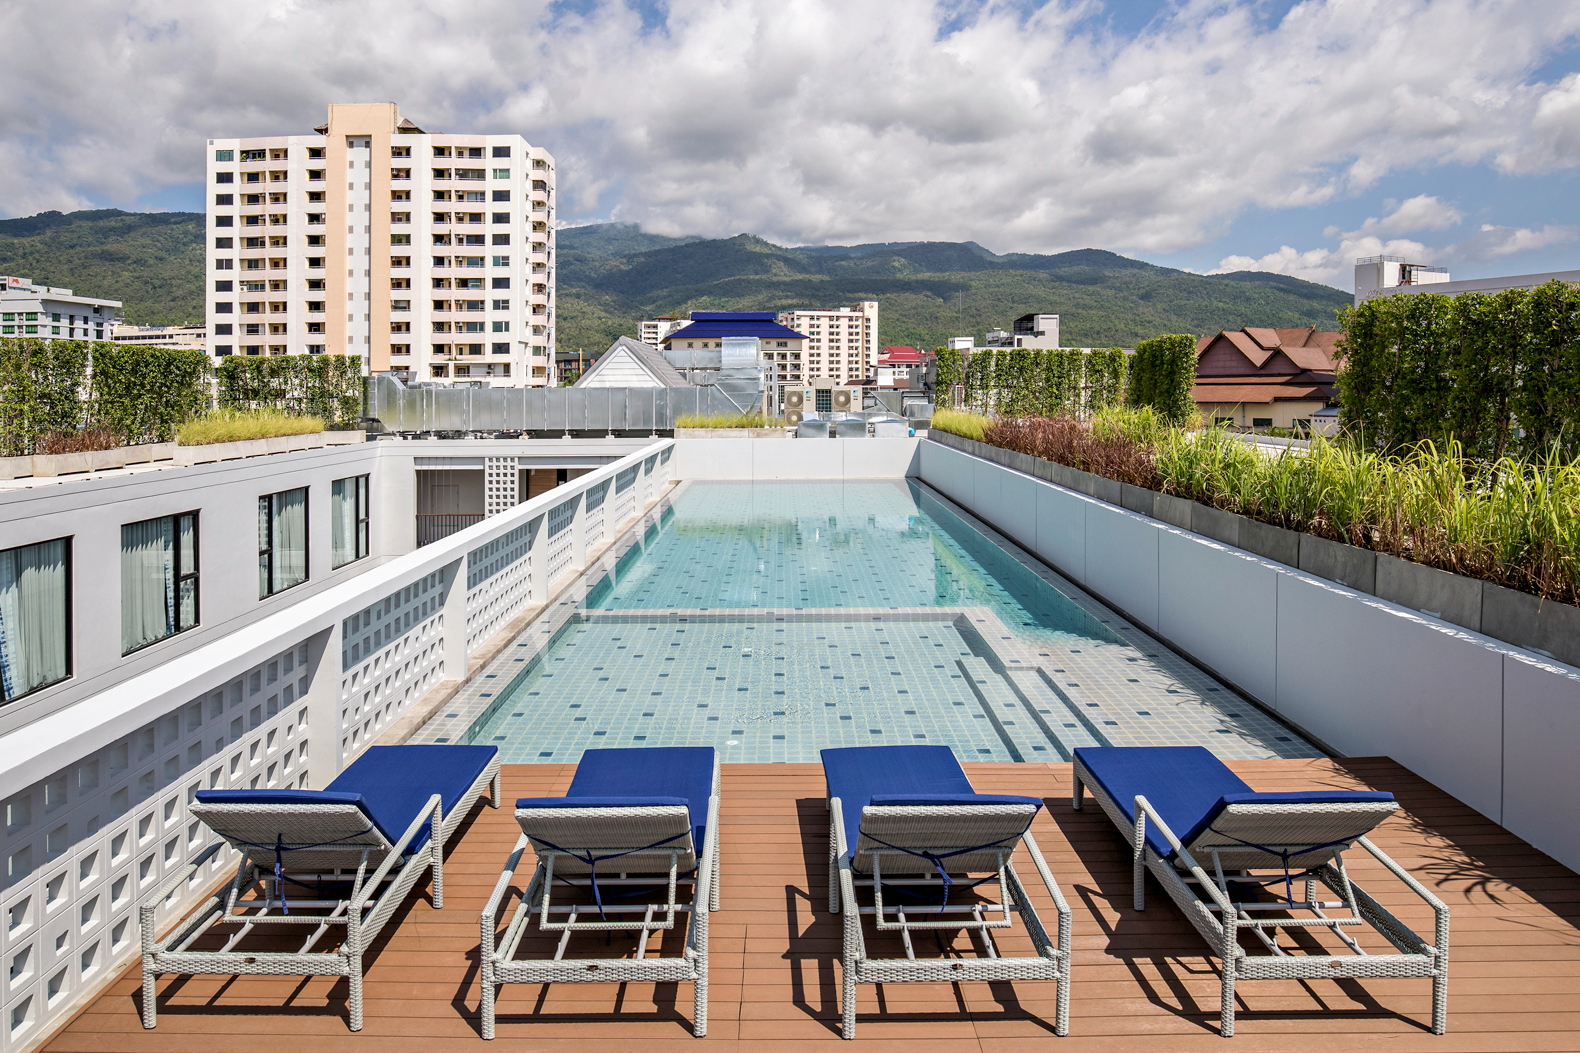 Rooftop swimming pool at Novotel Chiang Mai Nimman Journeyhub in Thailand. Click to enlarge.